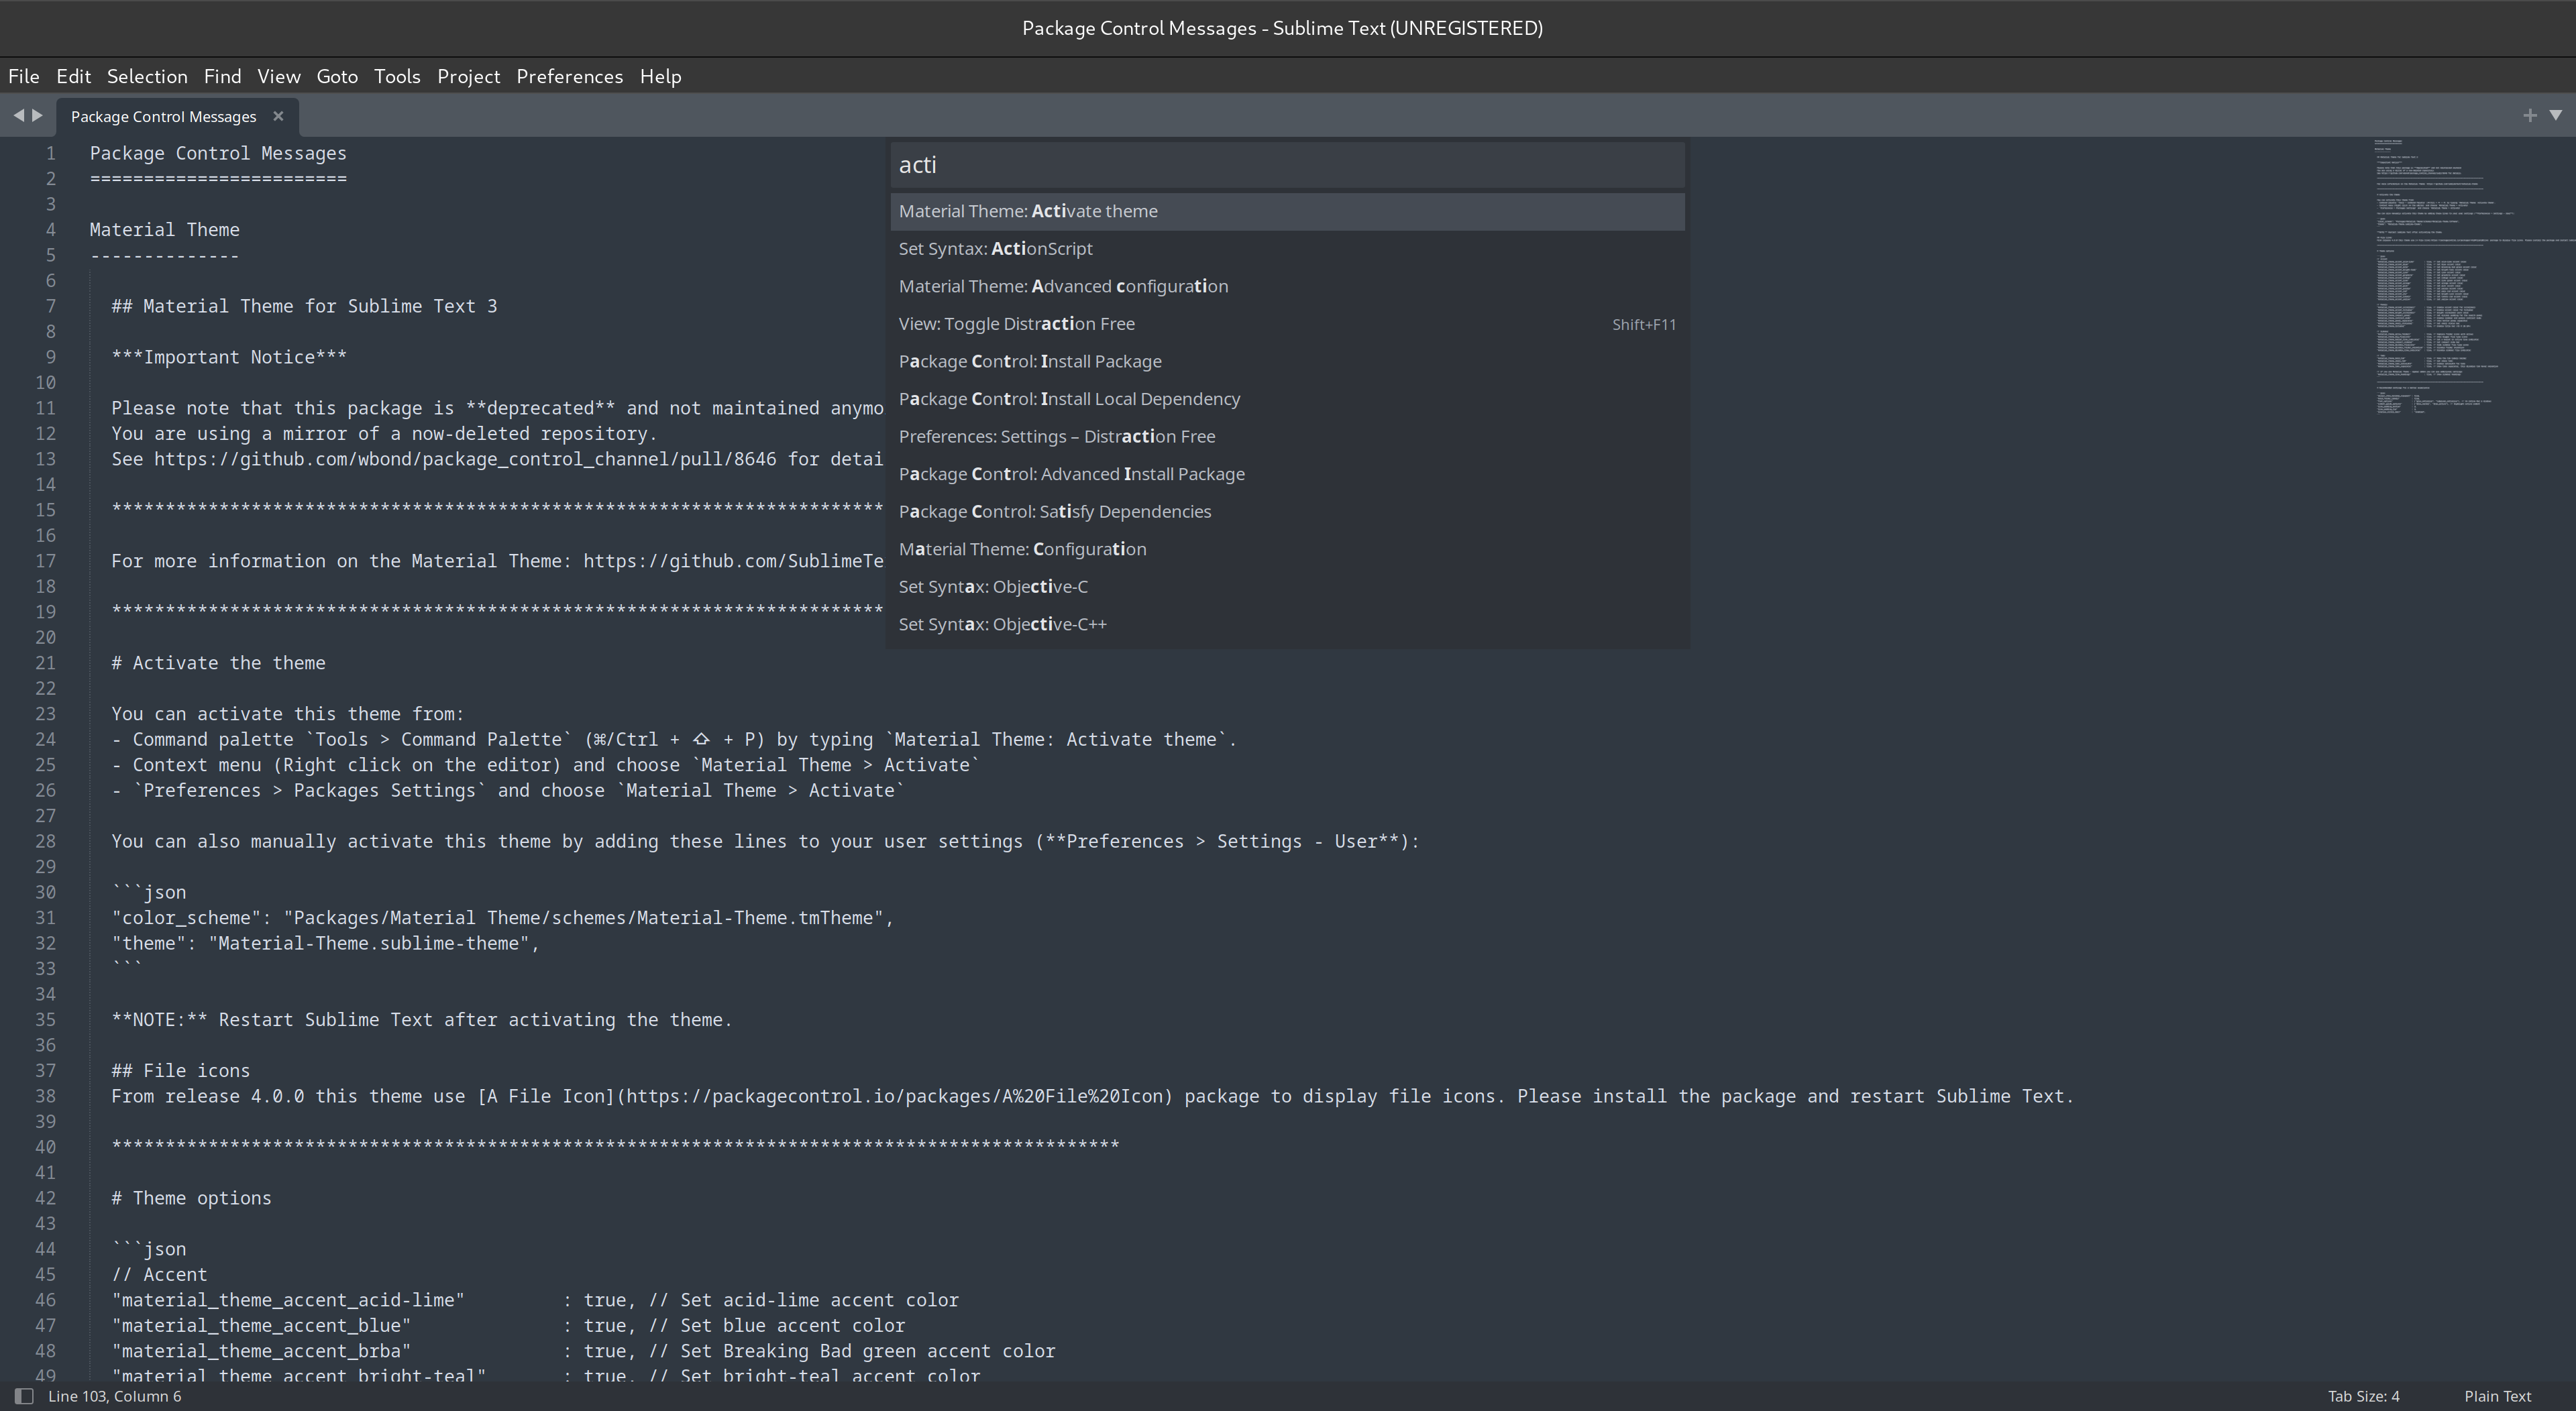 BEST CUSTOMIZATION FOR SUBLIME TEXT AFTER INSTALLING